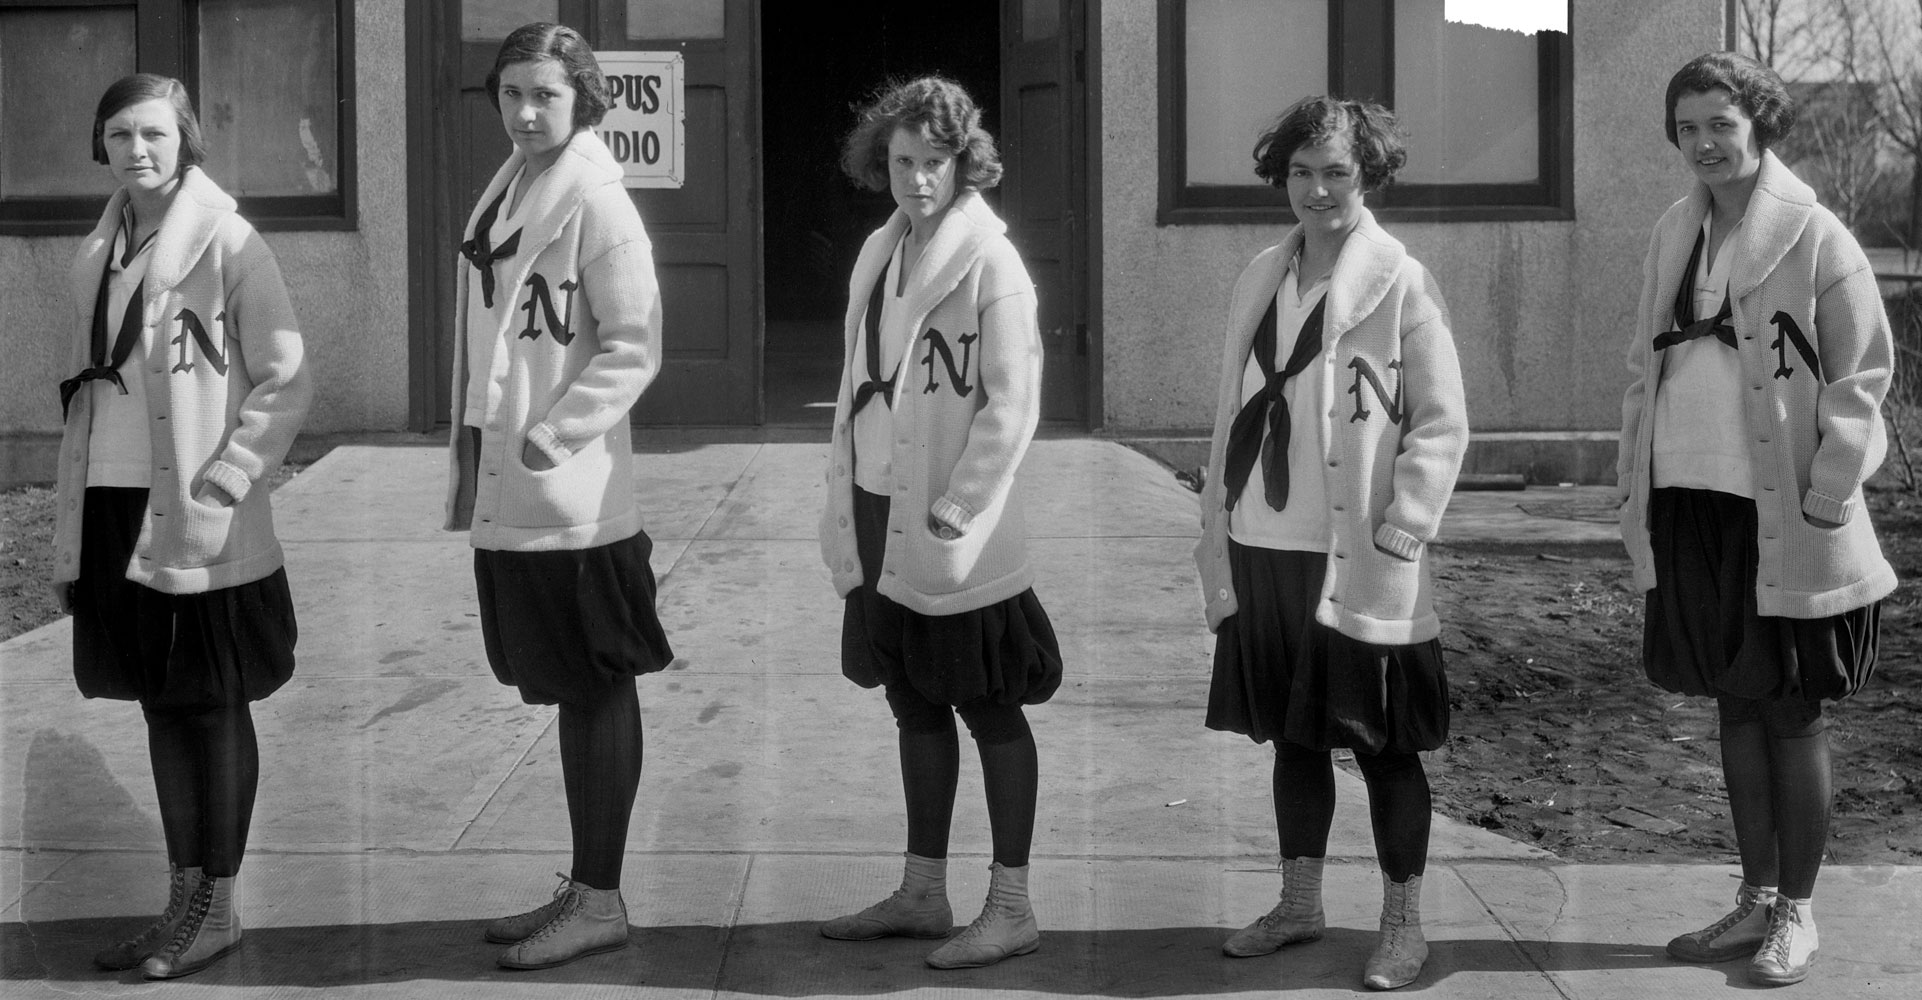 A black and white image of five women wearing coats with an N logo